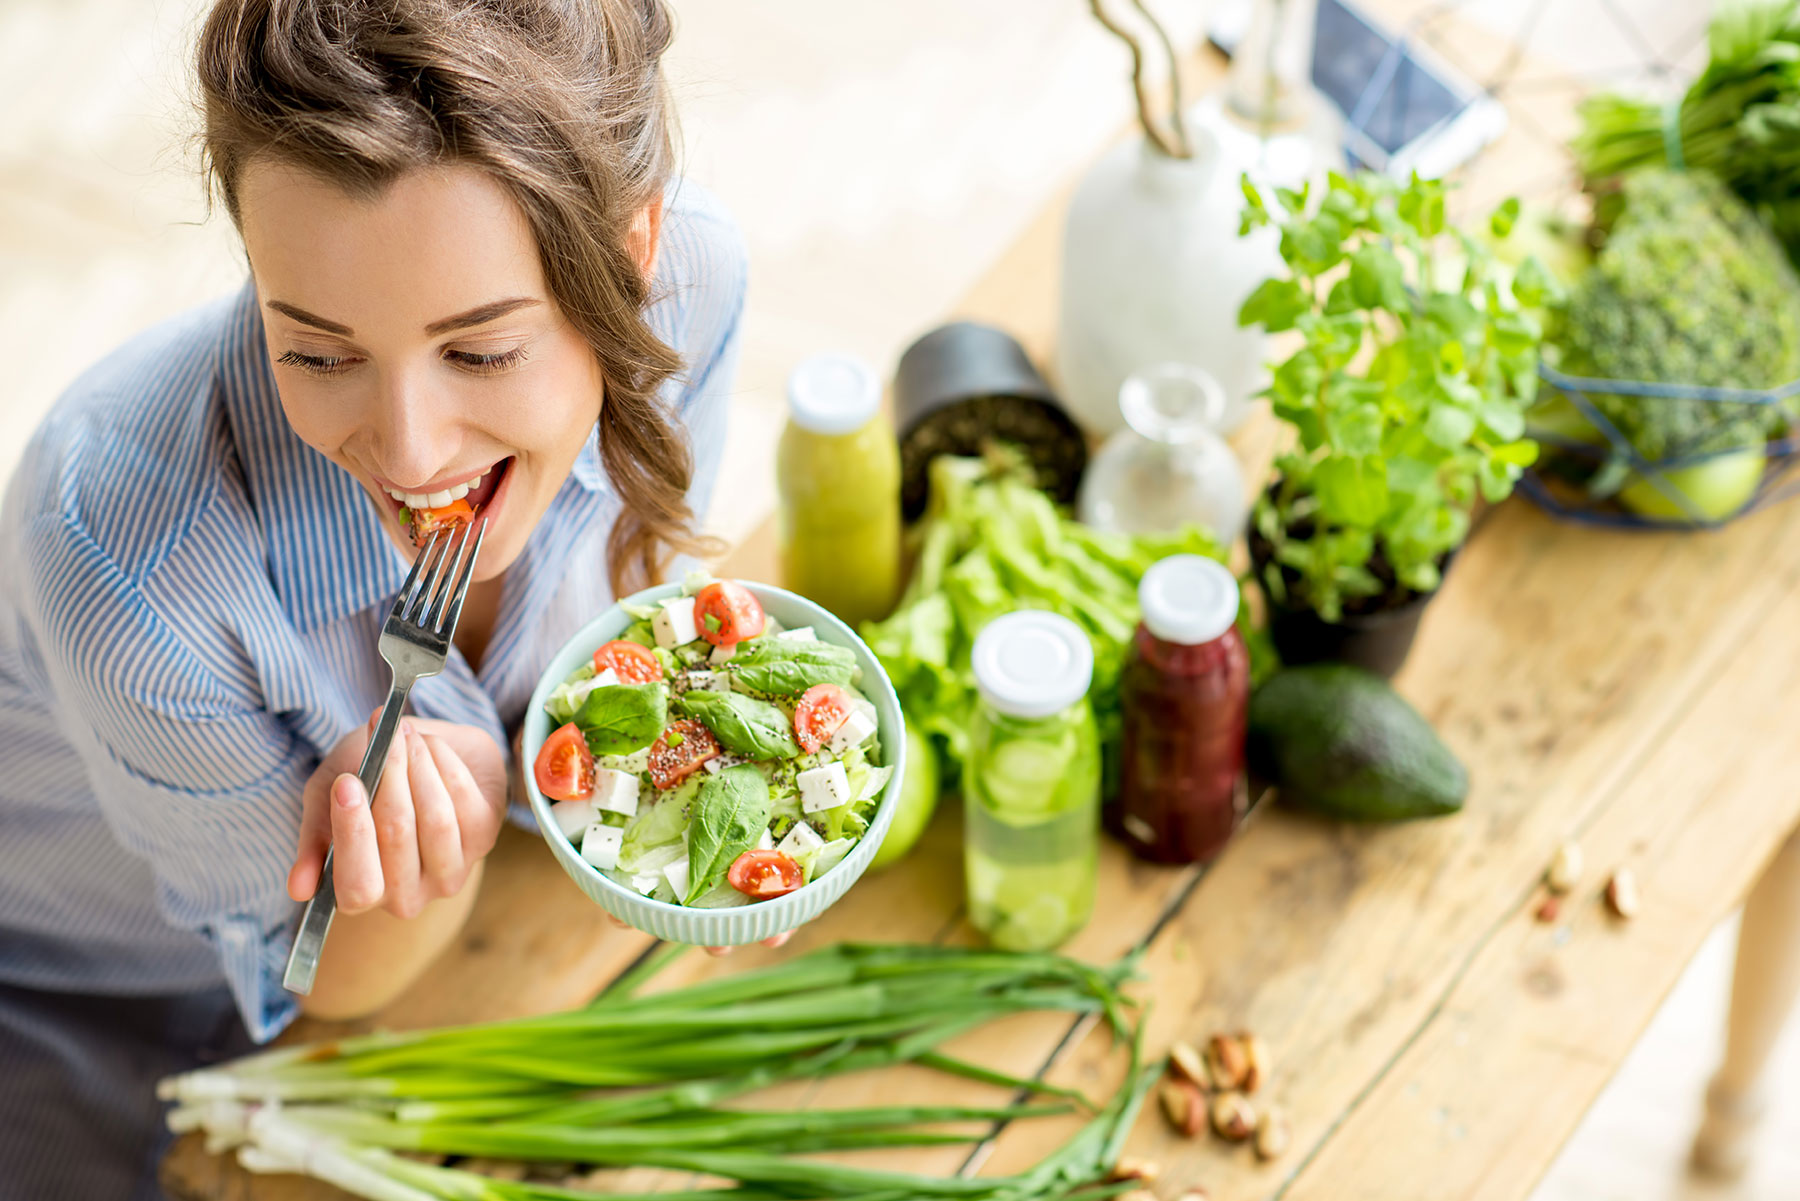 Healthy young woman fueling her body with green salad